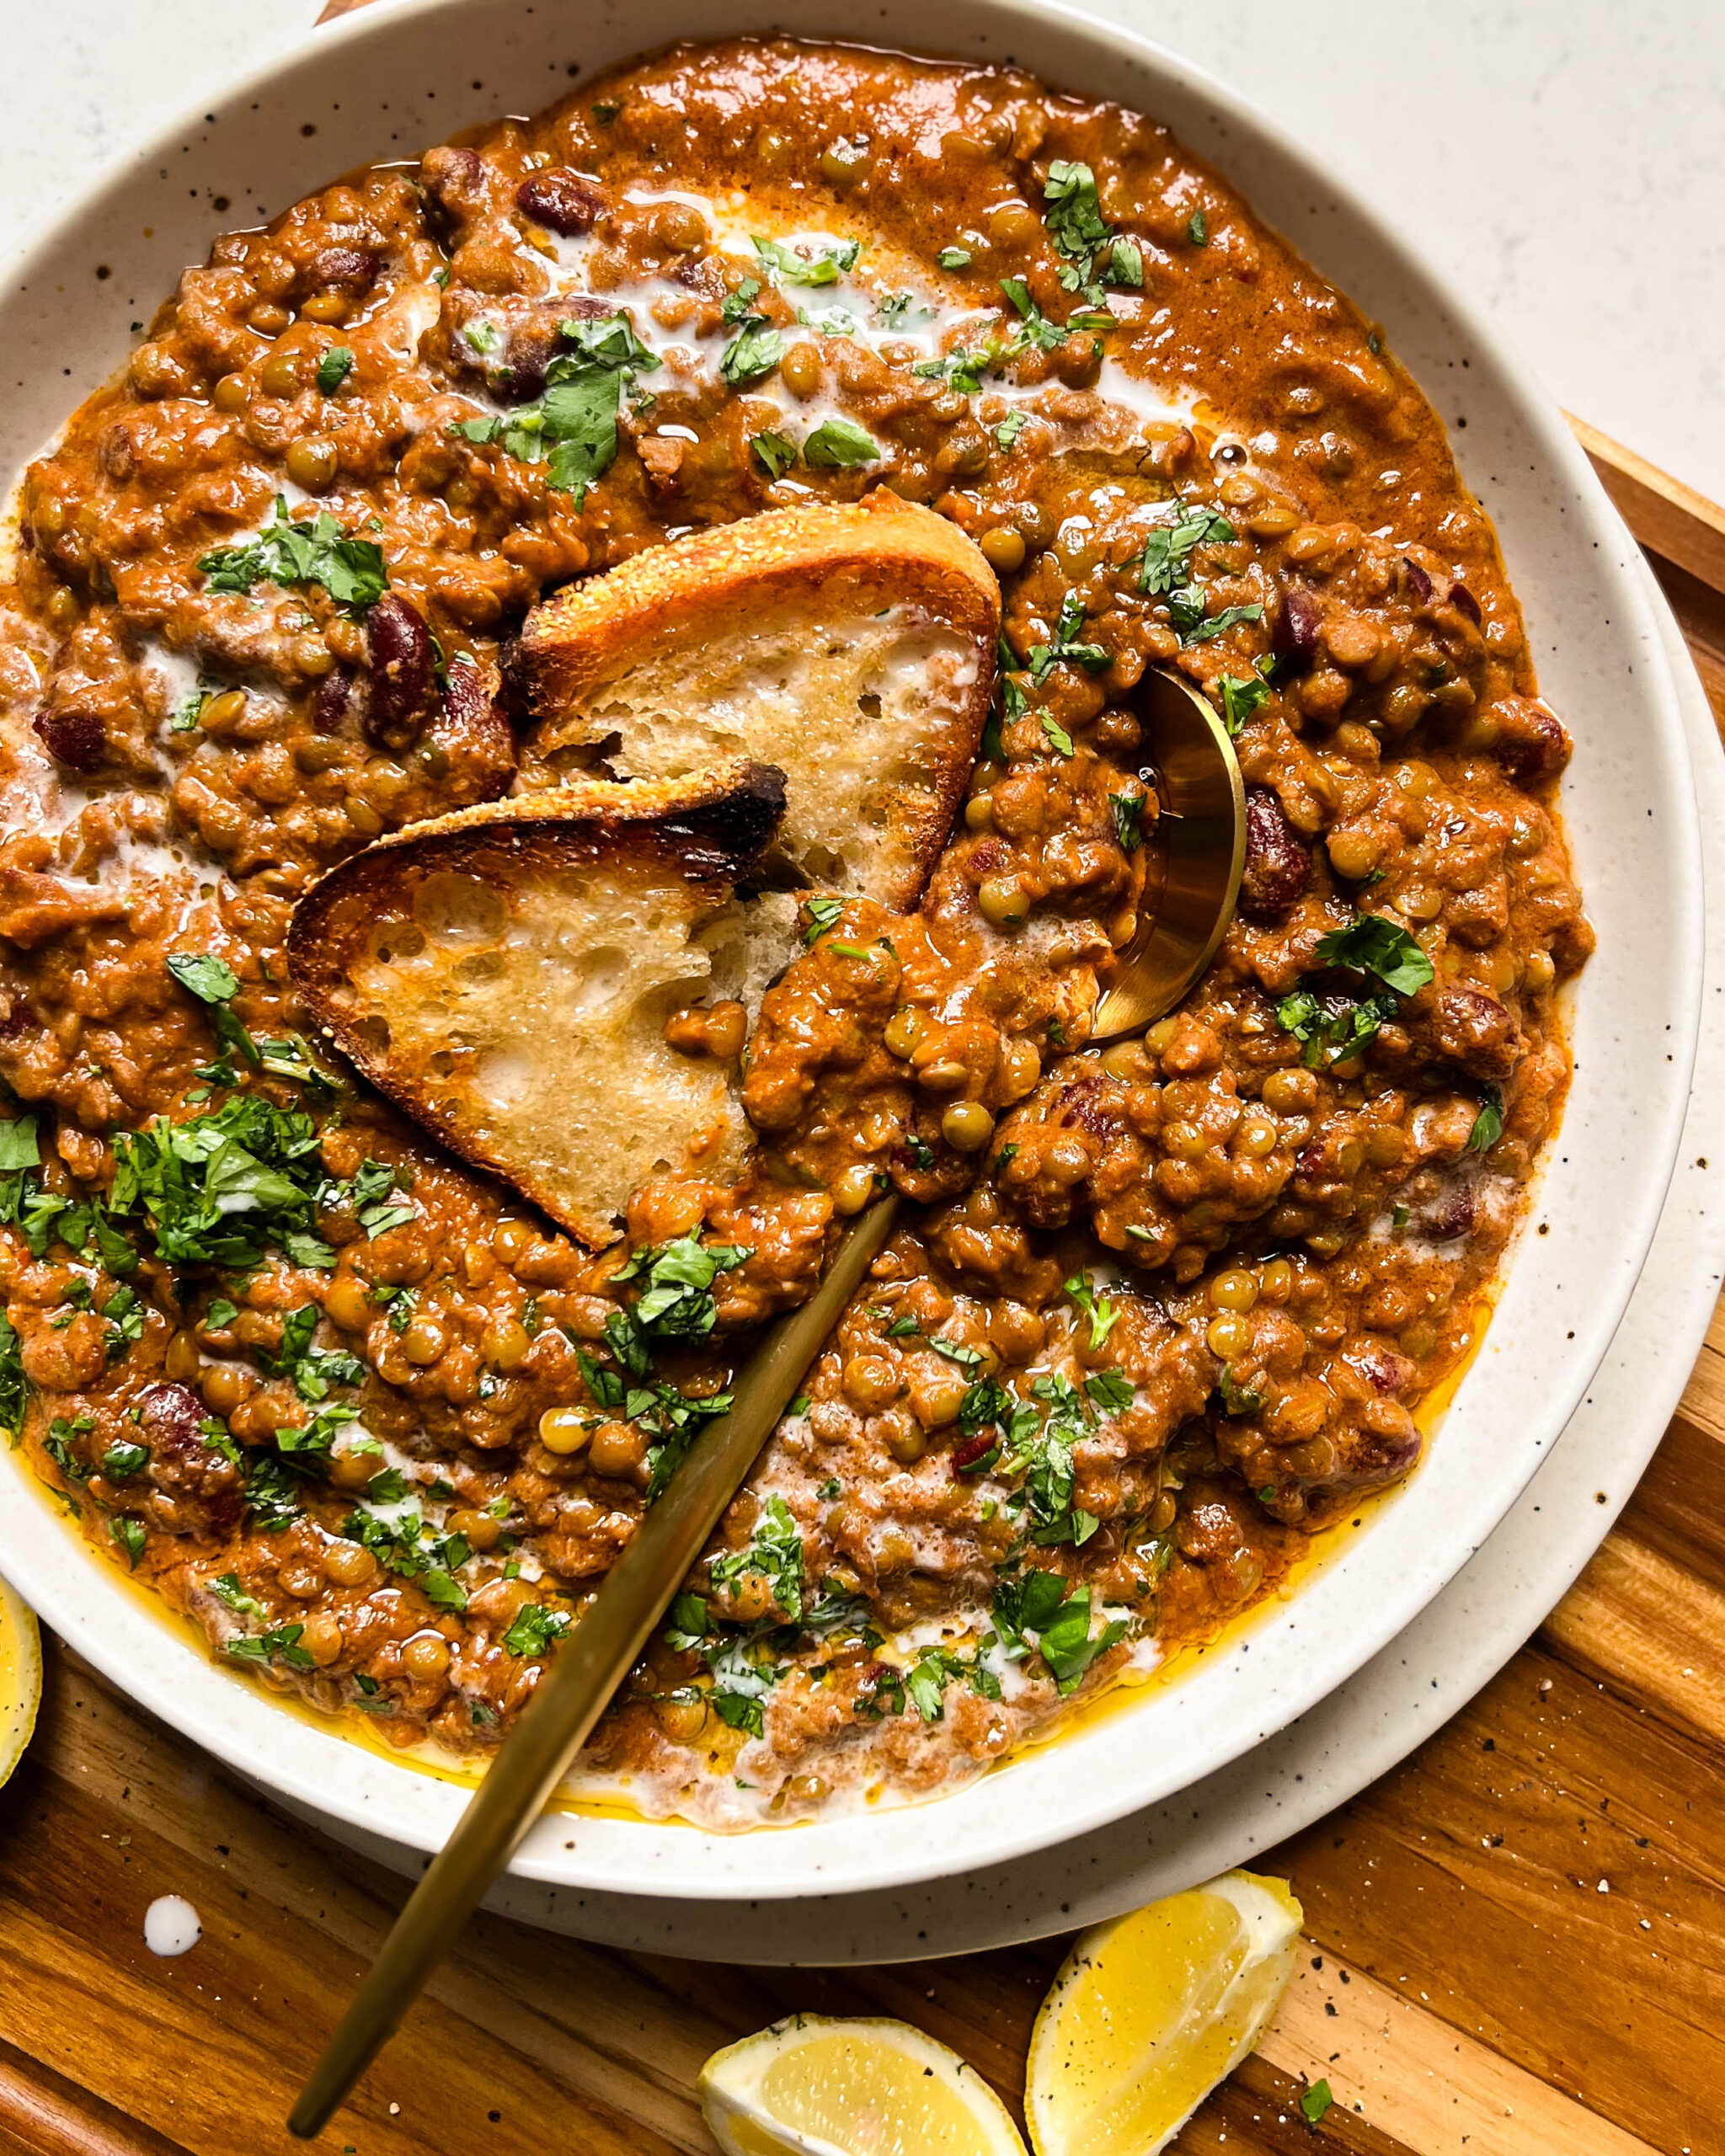 vegan dal makhani with bread in a speckled bowl